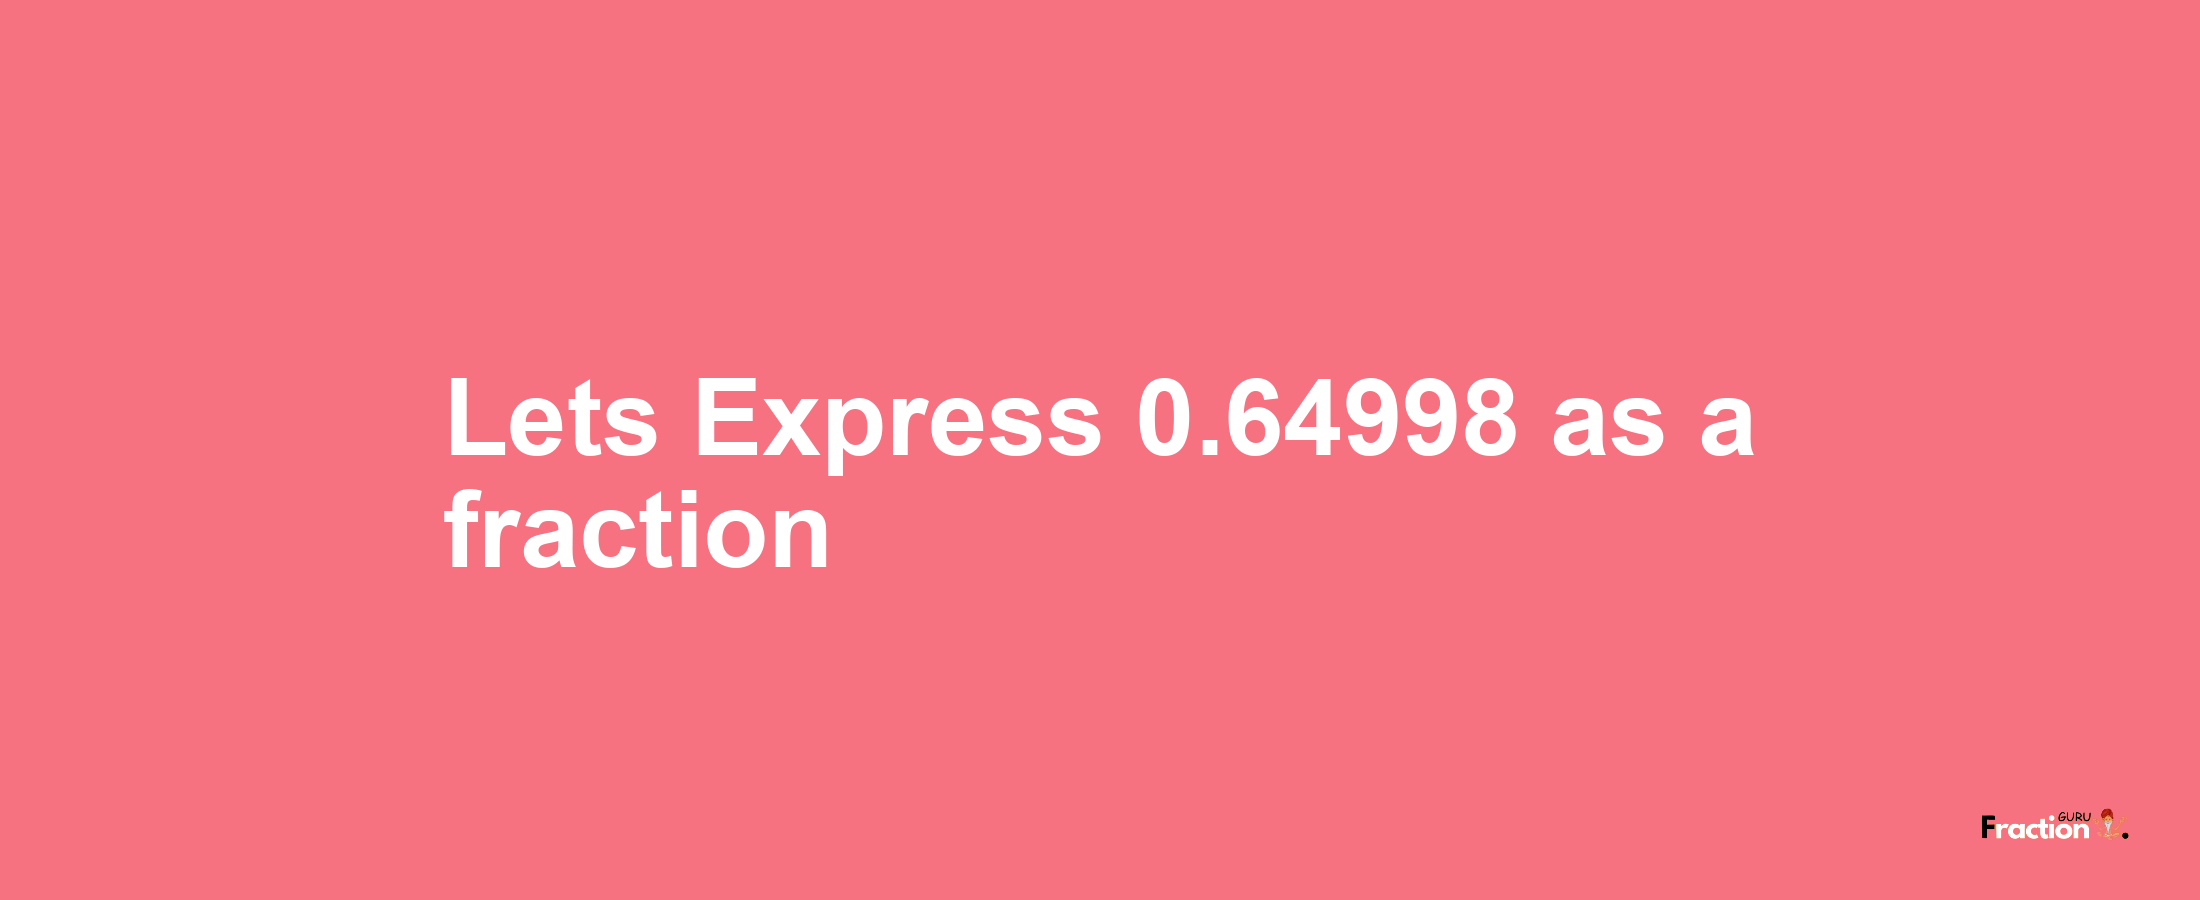 Lets Express 0.64998 as afraction